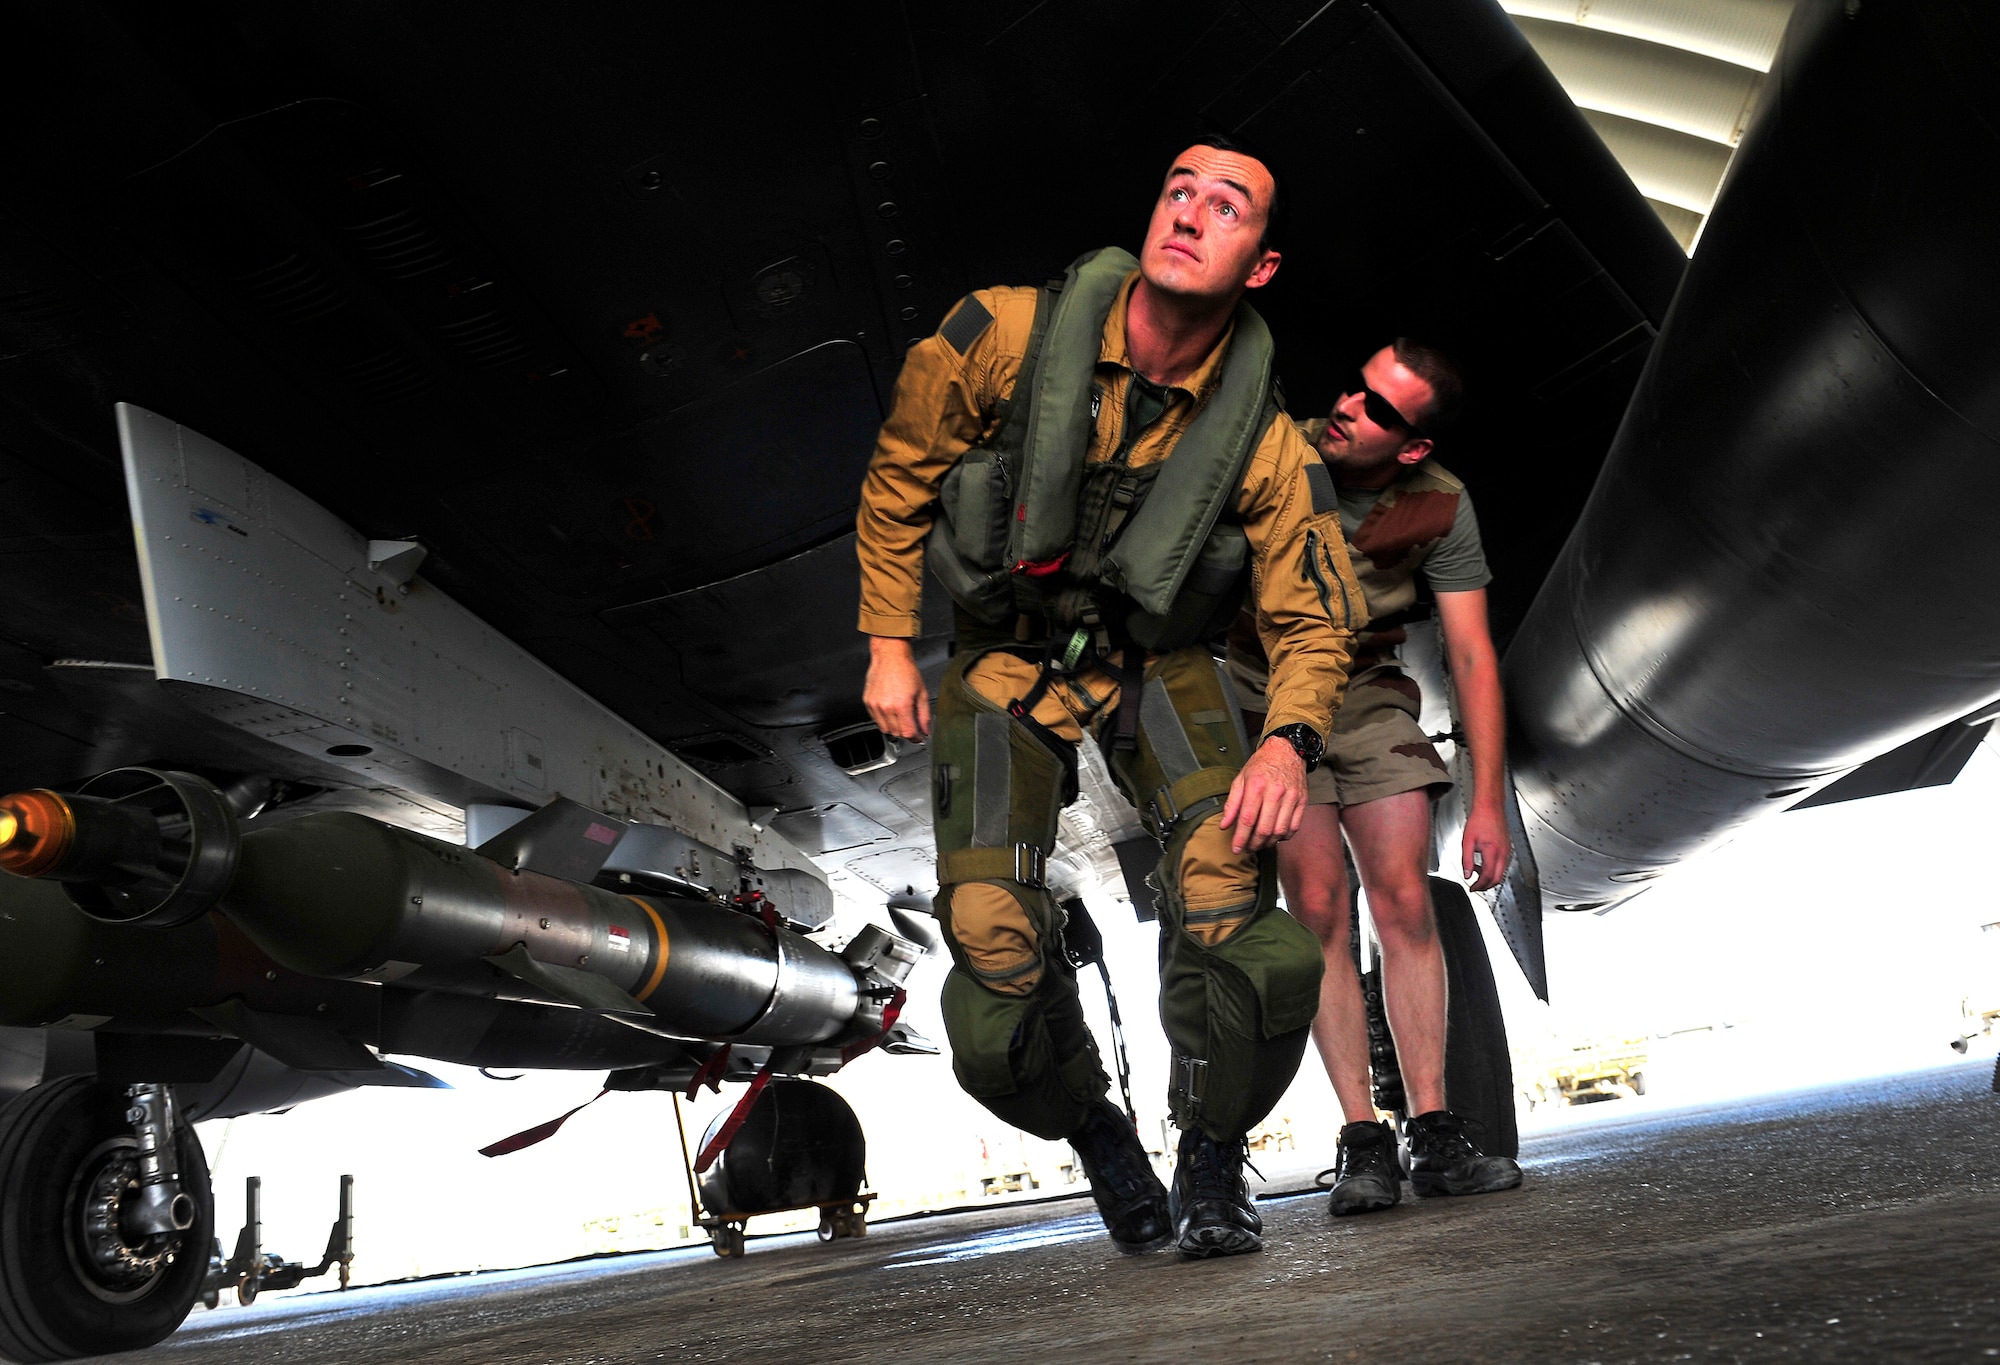 Members of the French Air Force, Detachment 3/3, perform maintenance inspections and checklists on a Mirage 2000-D before a combat mission at Kandahar Airfield, Afghanistan, June 15, 2012. The French AF has been a coalition partner with the U.S. during Operation Enduring Freedom (OEF) and perform air to ground close air support missions for friendly ground forces. (U.S. Air Force photo/Staff Sgt. Clay Lancaster)
